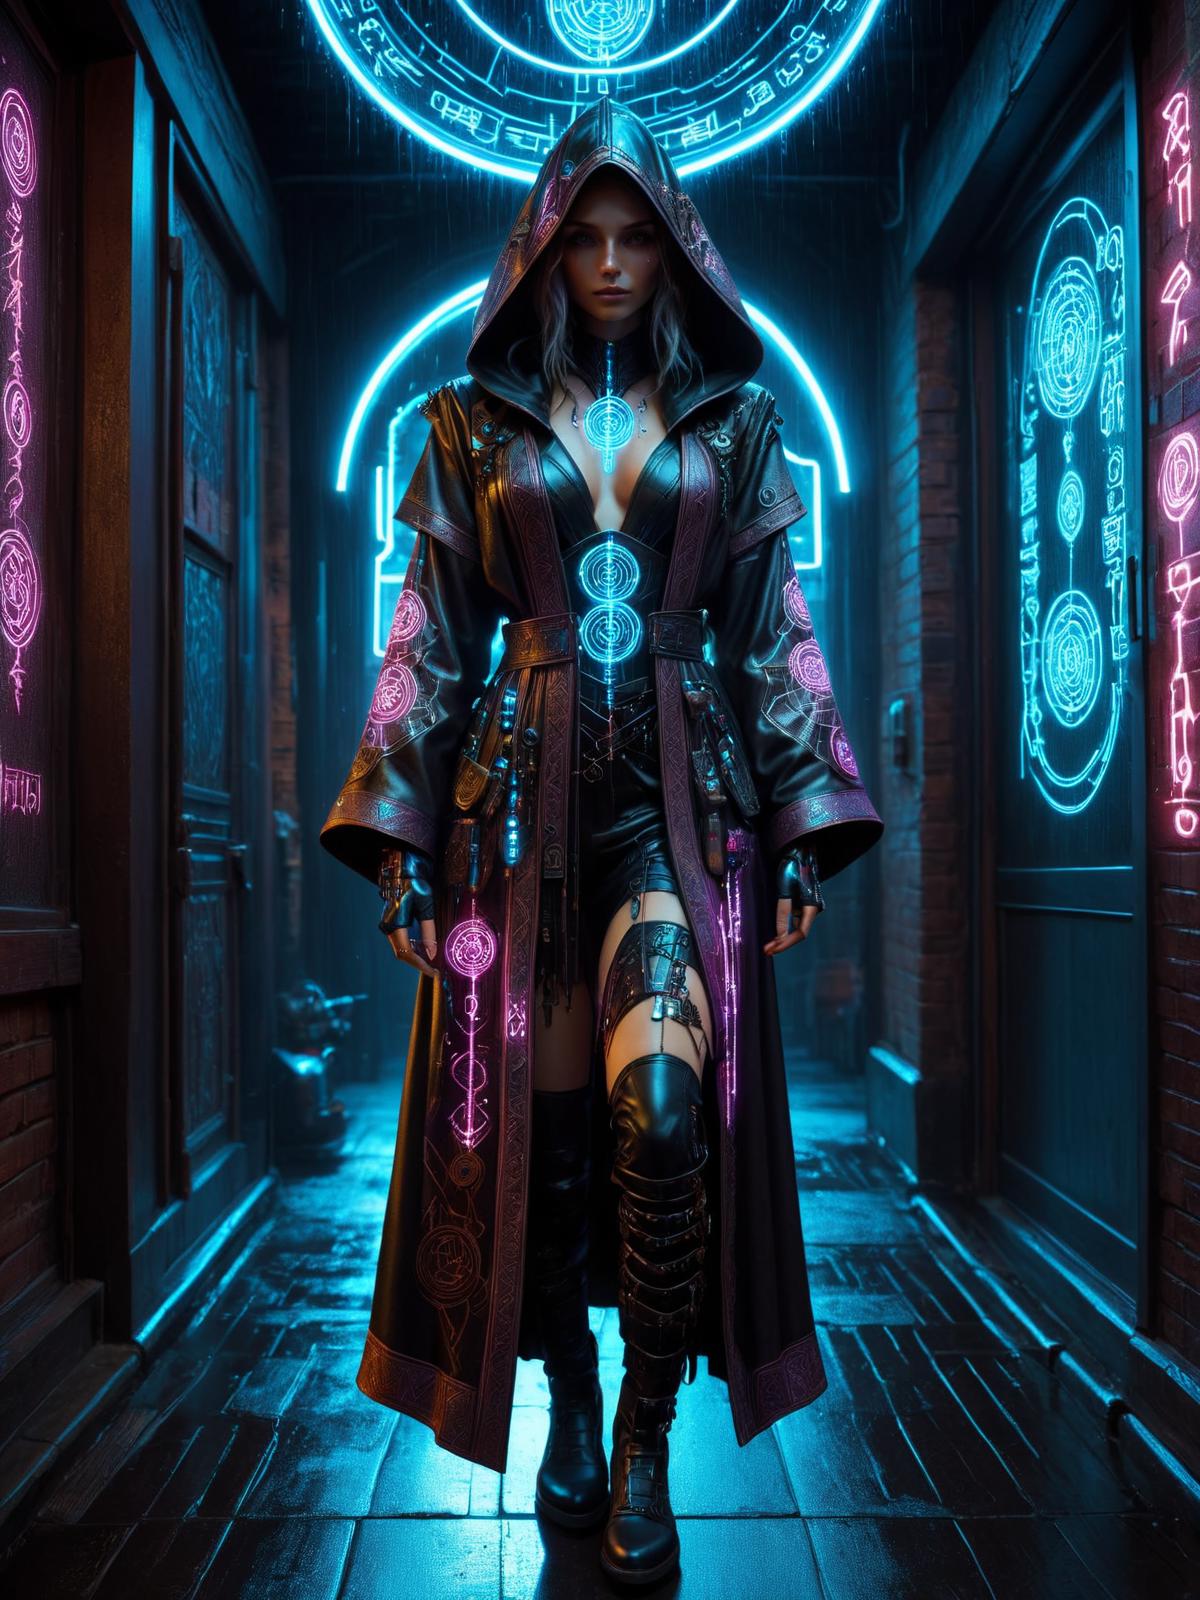 Neon Cyberpunk SDXL - Techno-Mages image by maDcaDDie